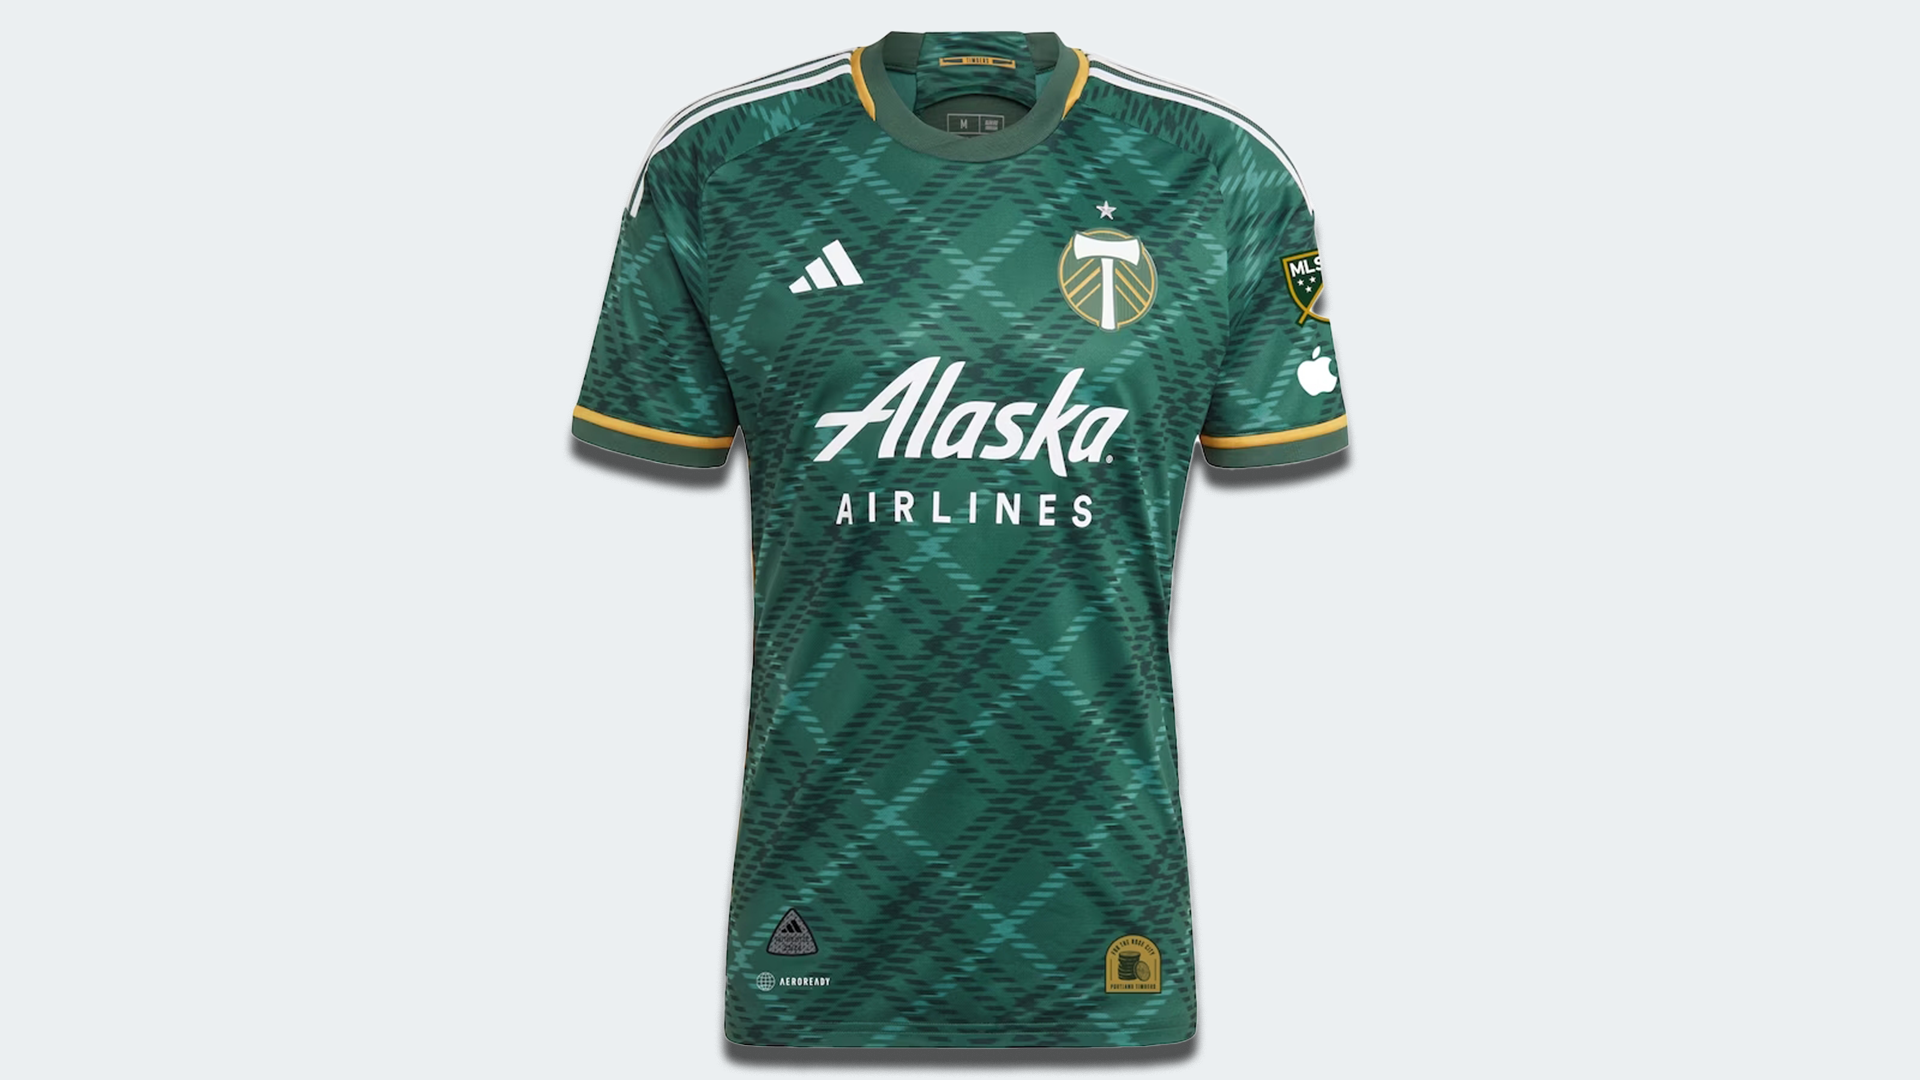 MLS Jersey Week: See every new kit for the 2023 season